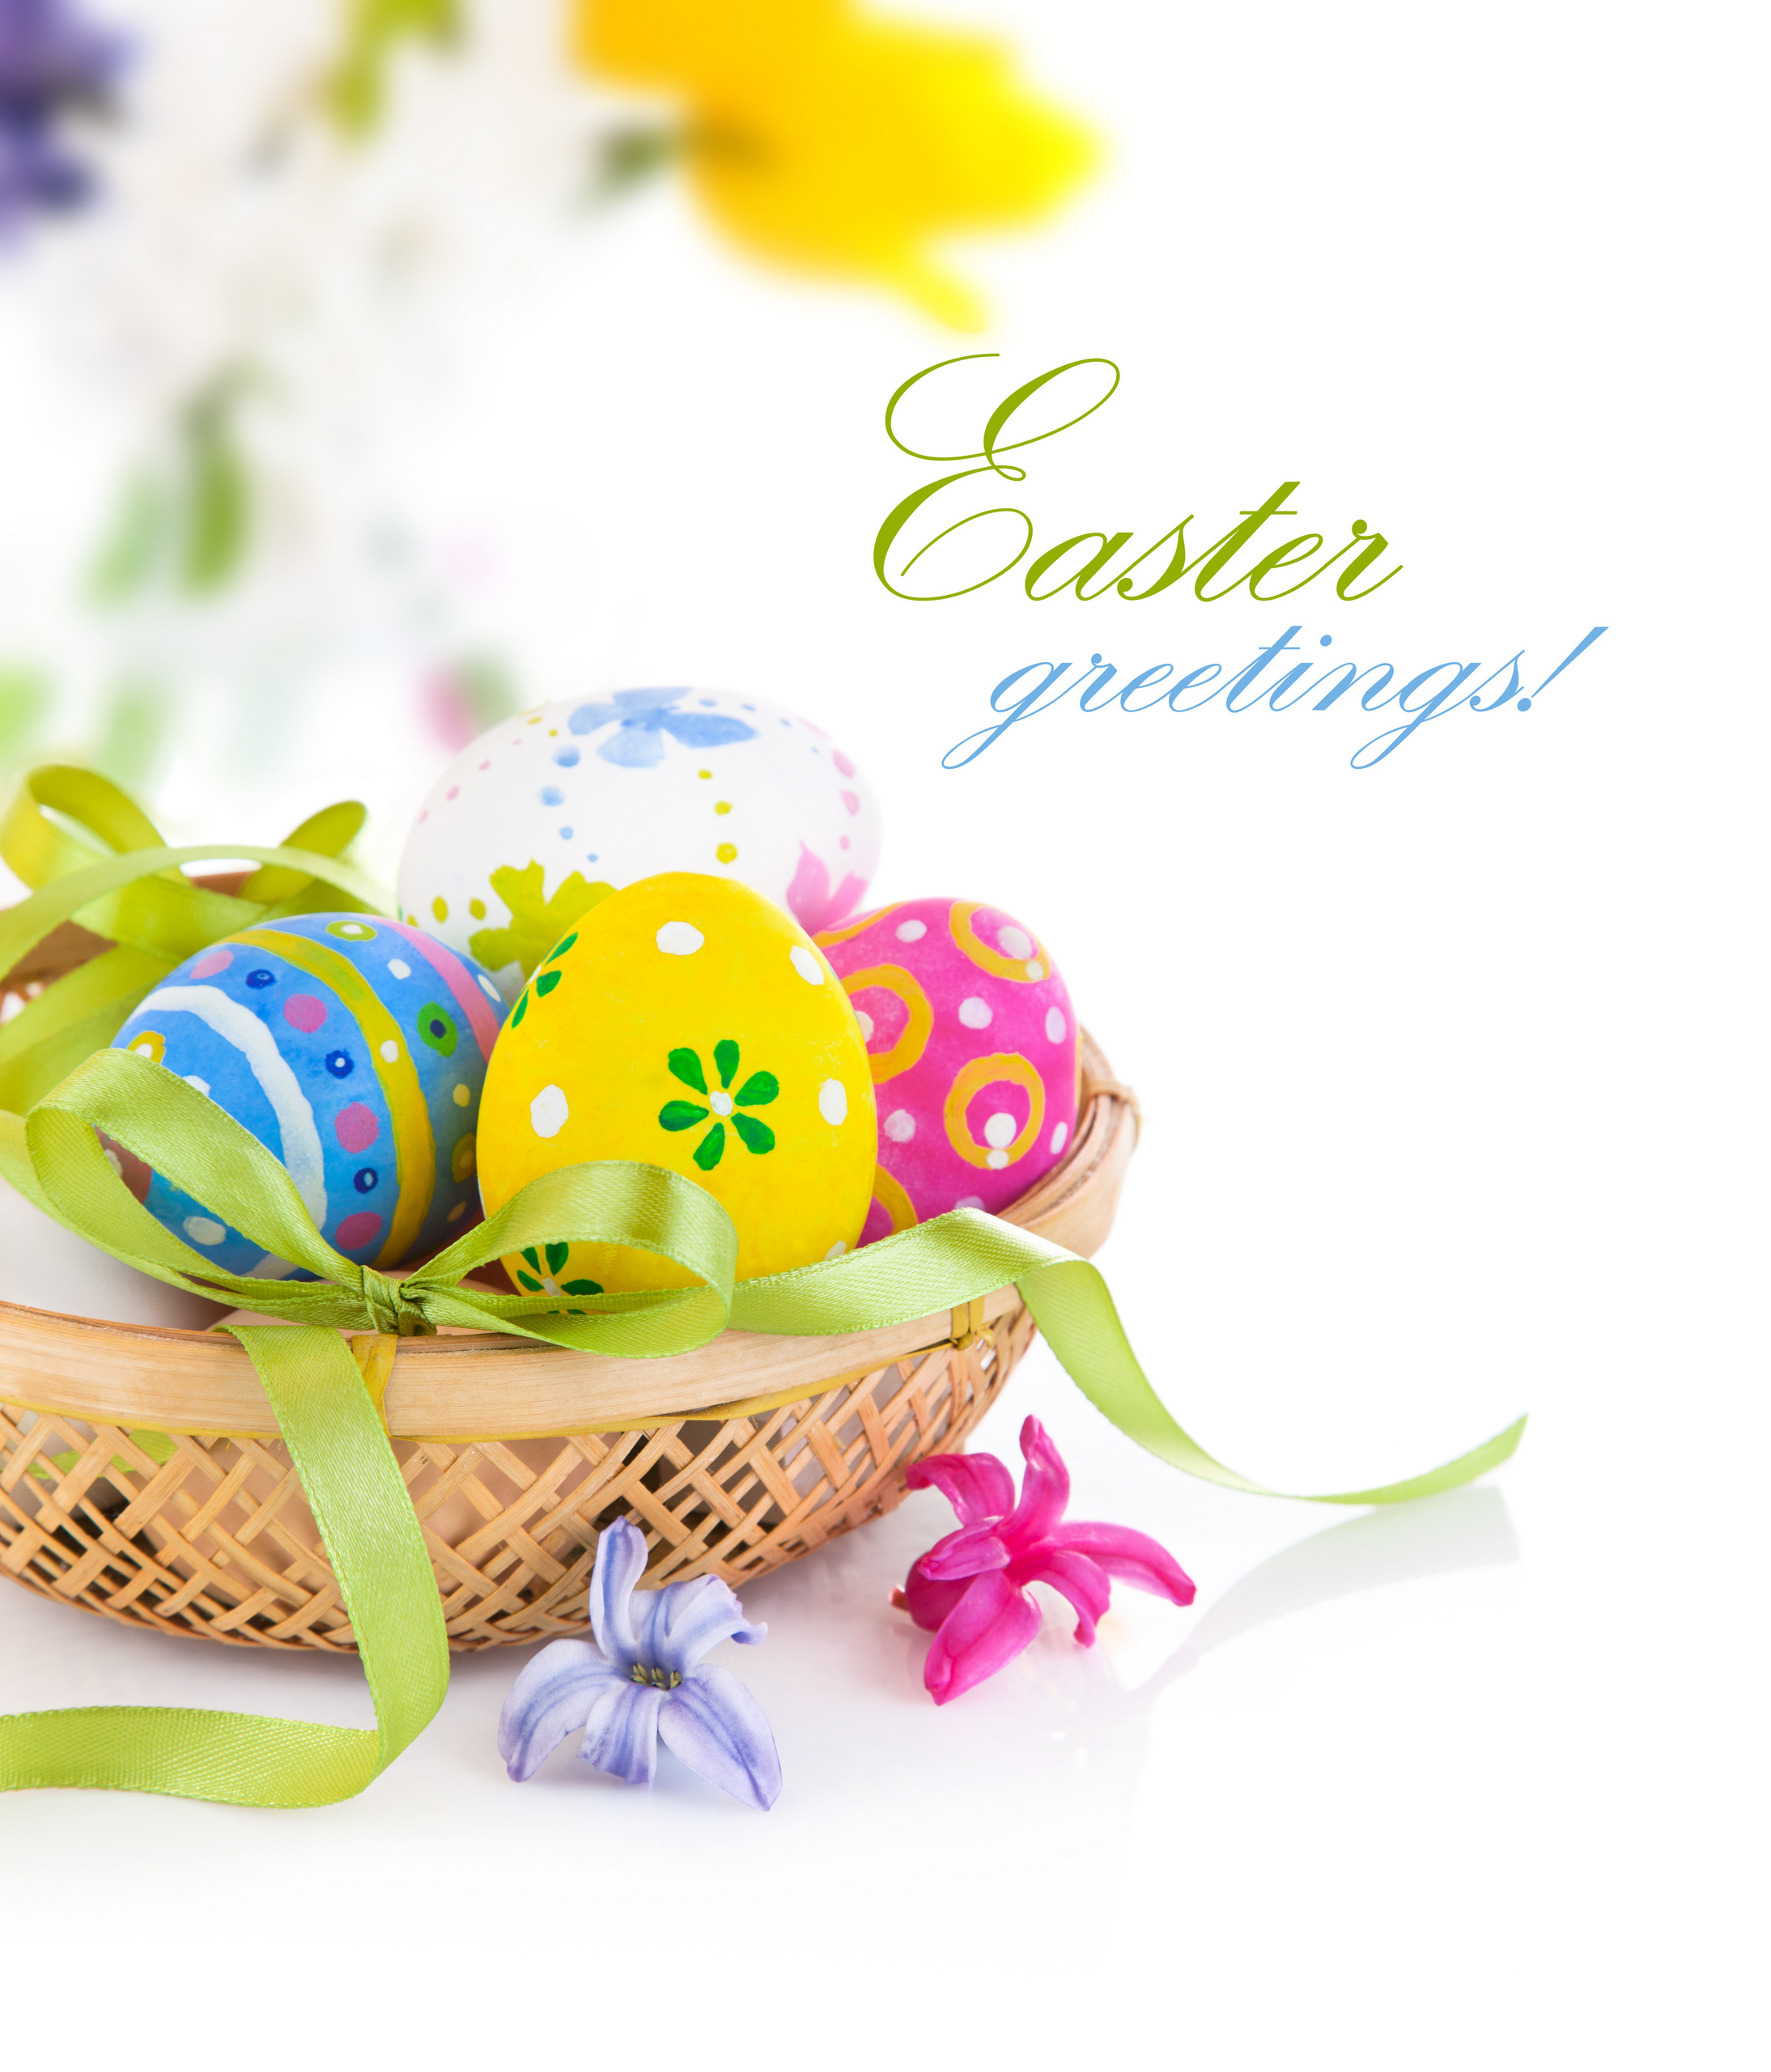 easter-greeting-cards-3.